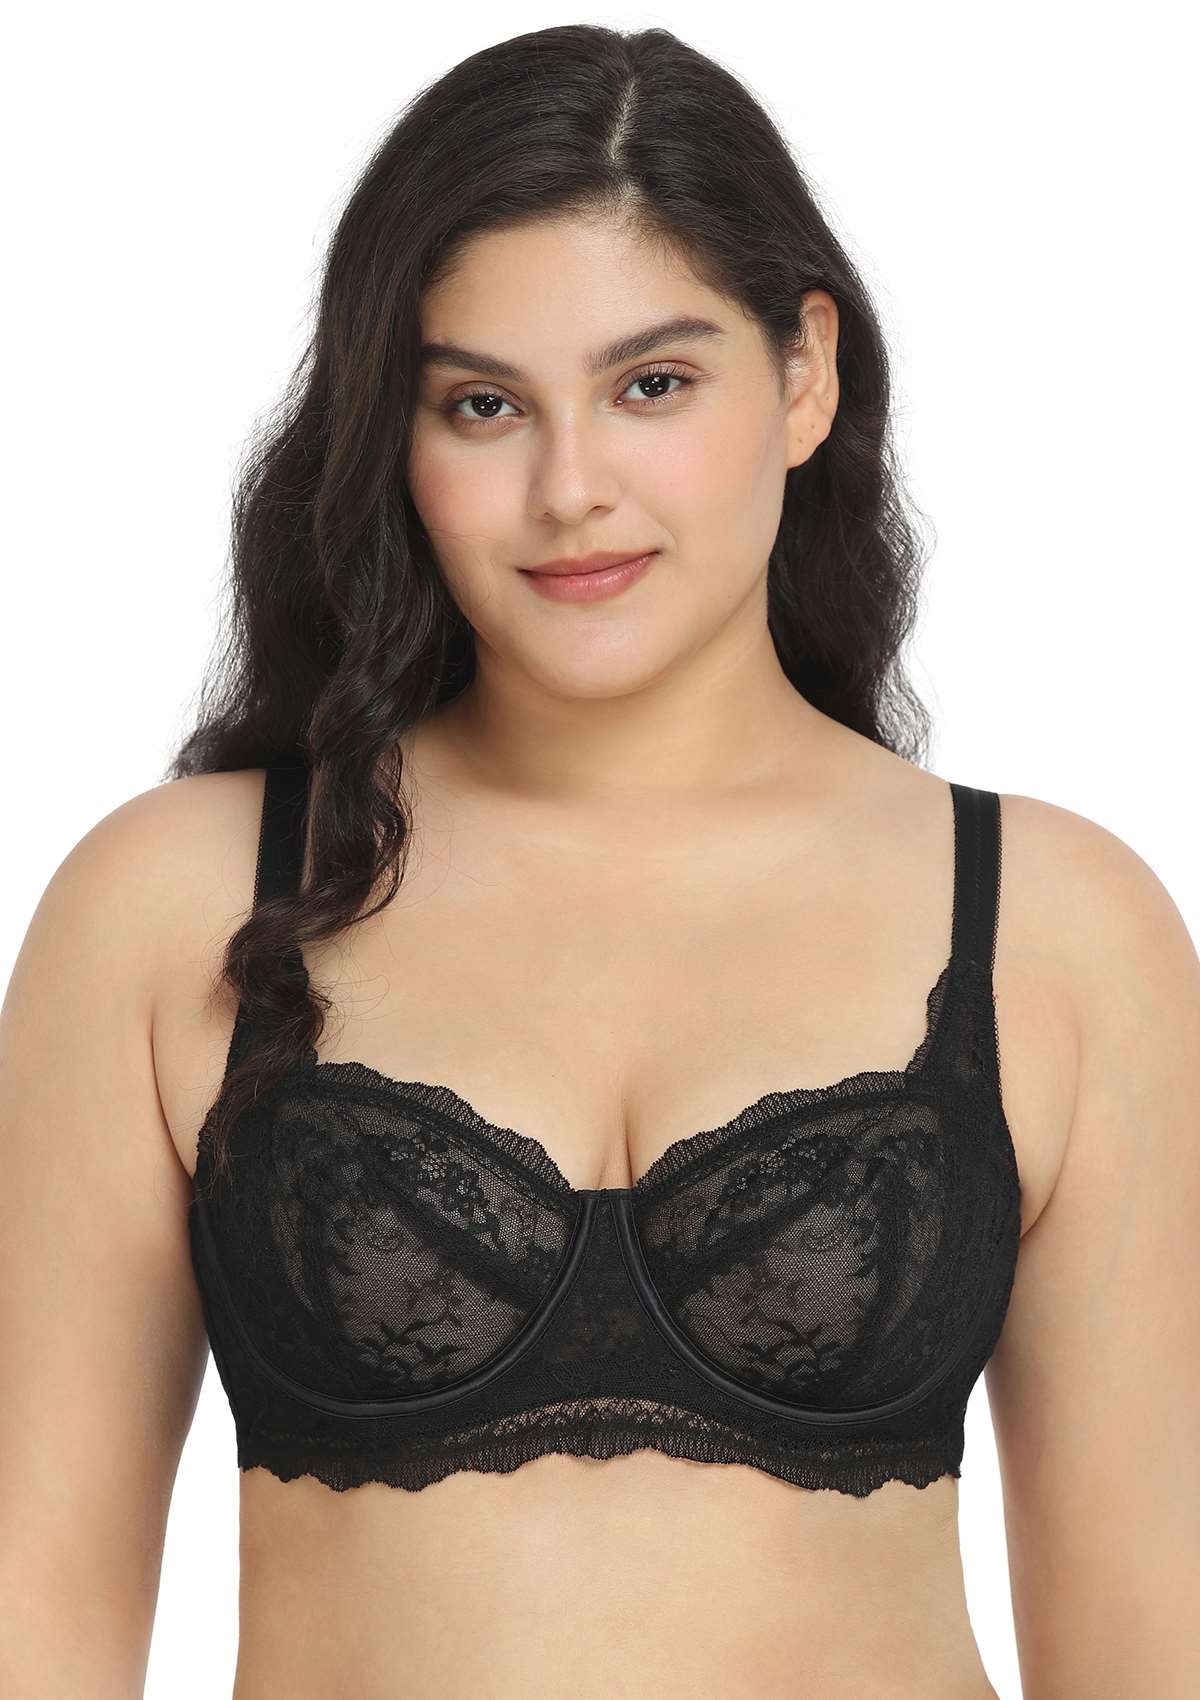 HSIA I Do Floral Lace Bridal Balconette Beautiful Bra For Special Day - Black / 40 / D